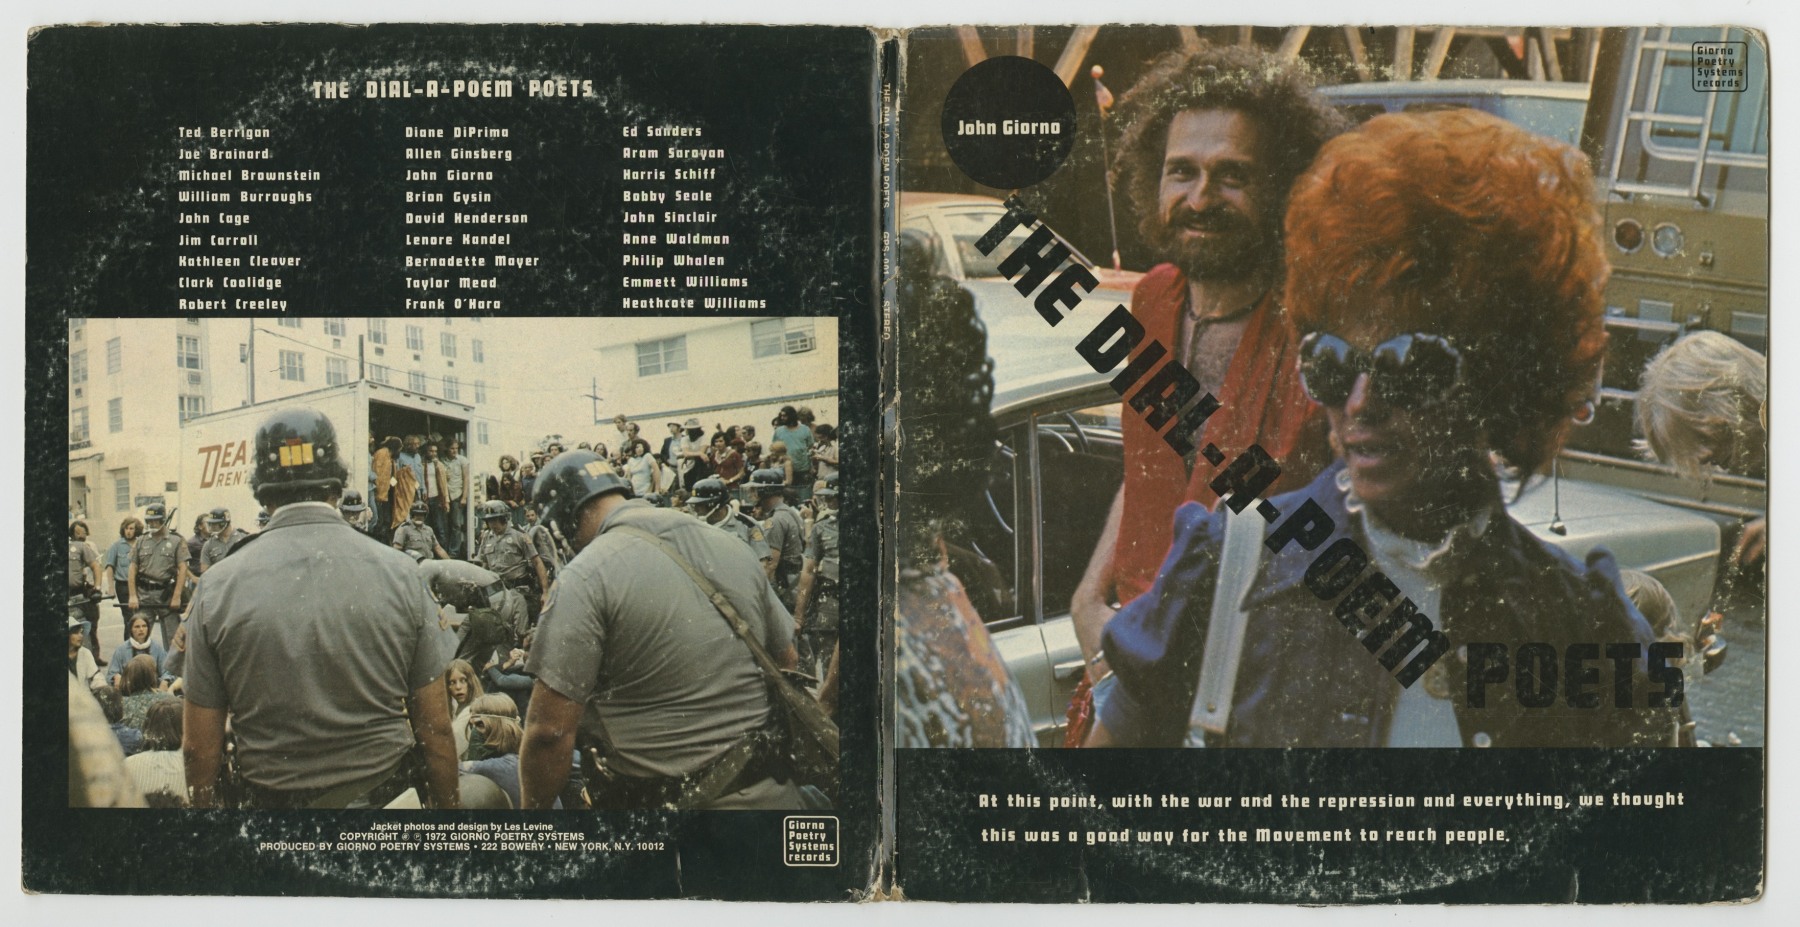 The Dial-A-Poem Poets LP, front and back covers